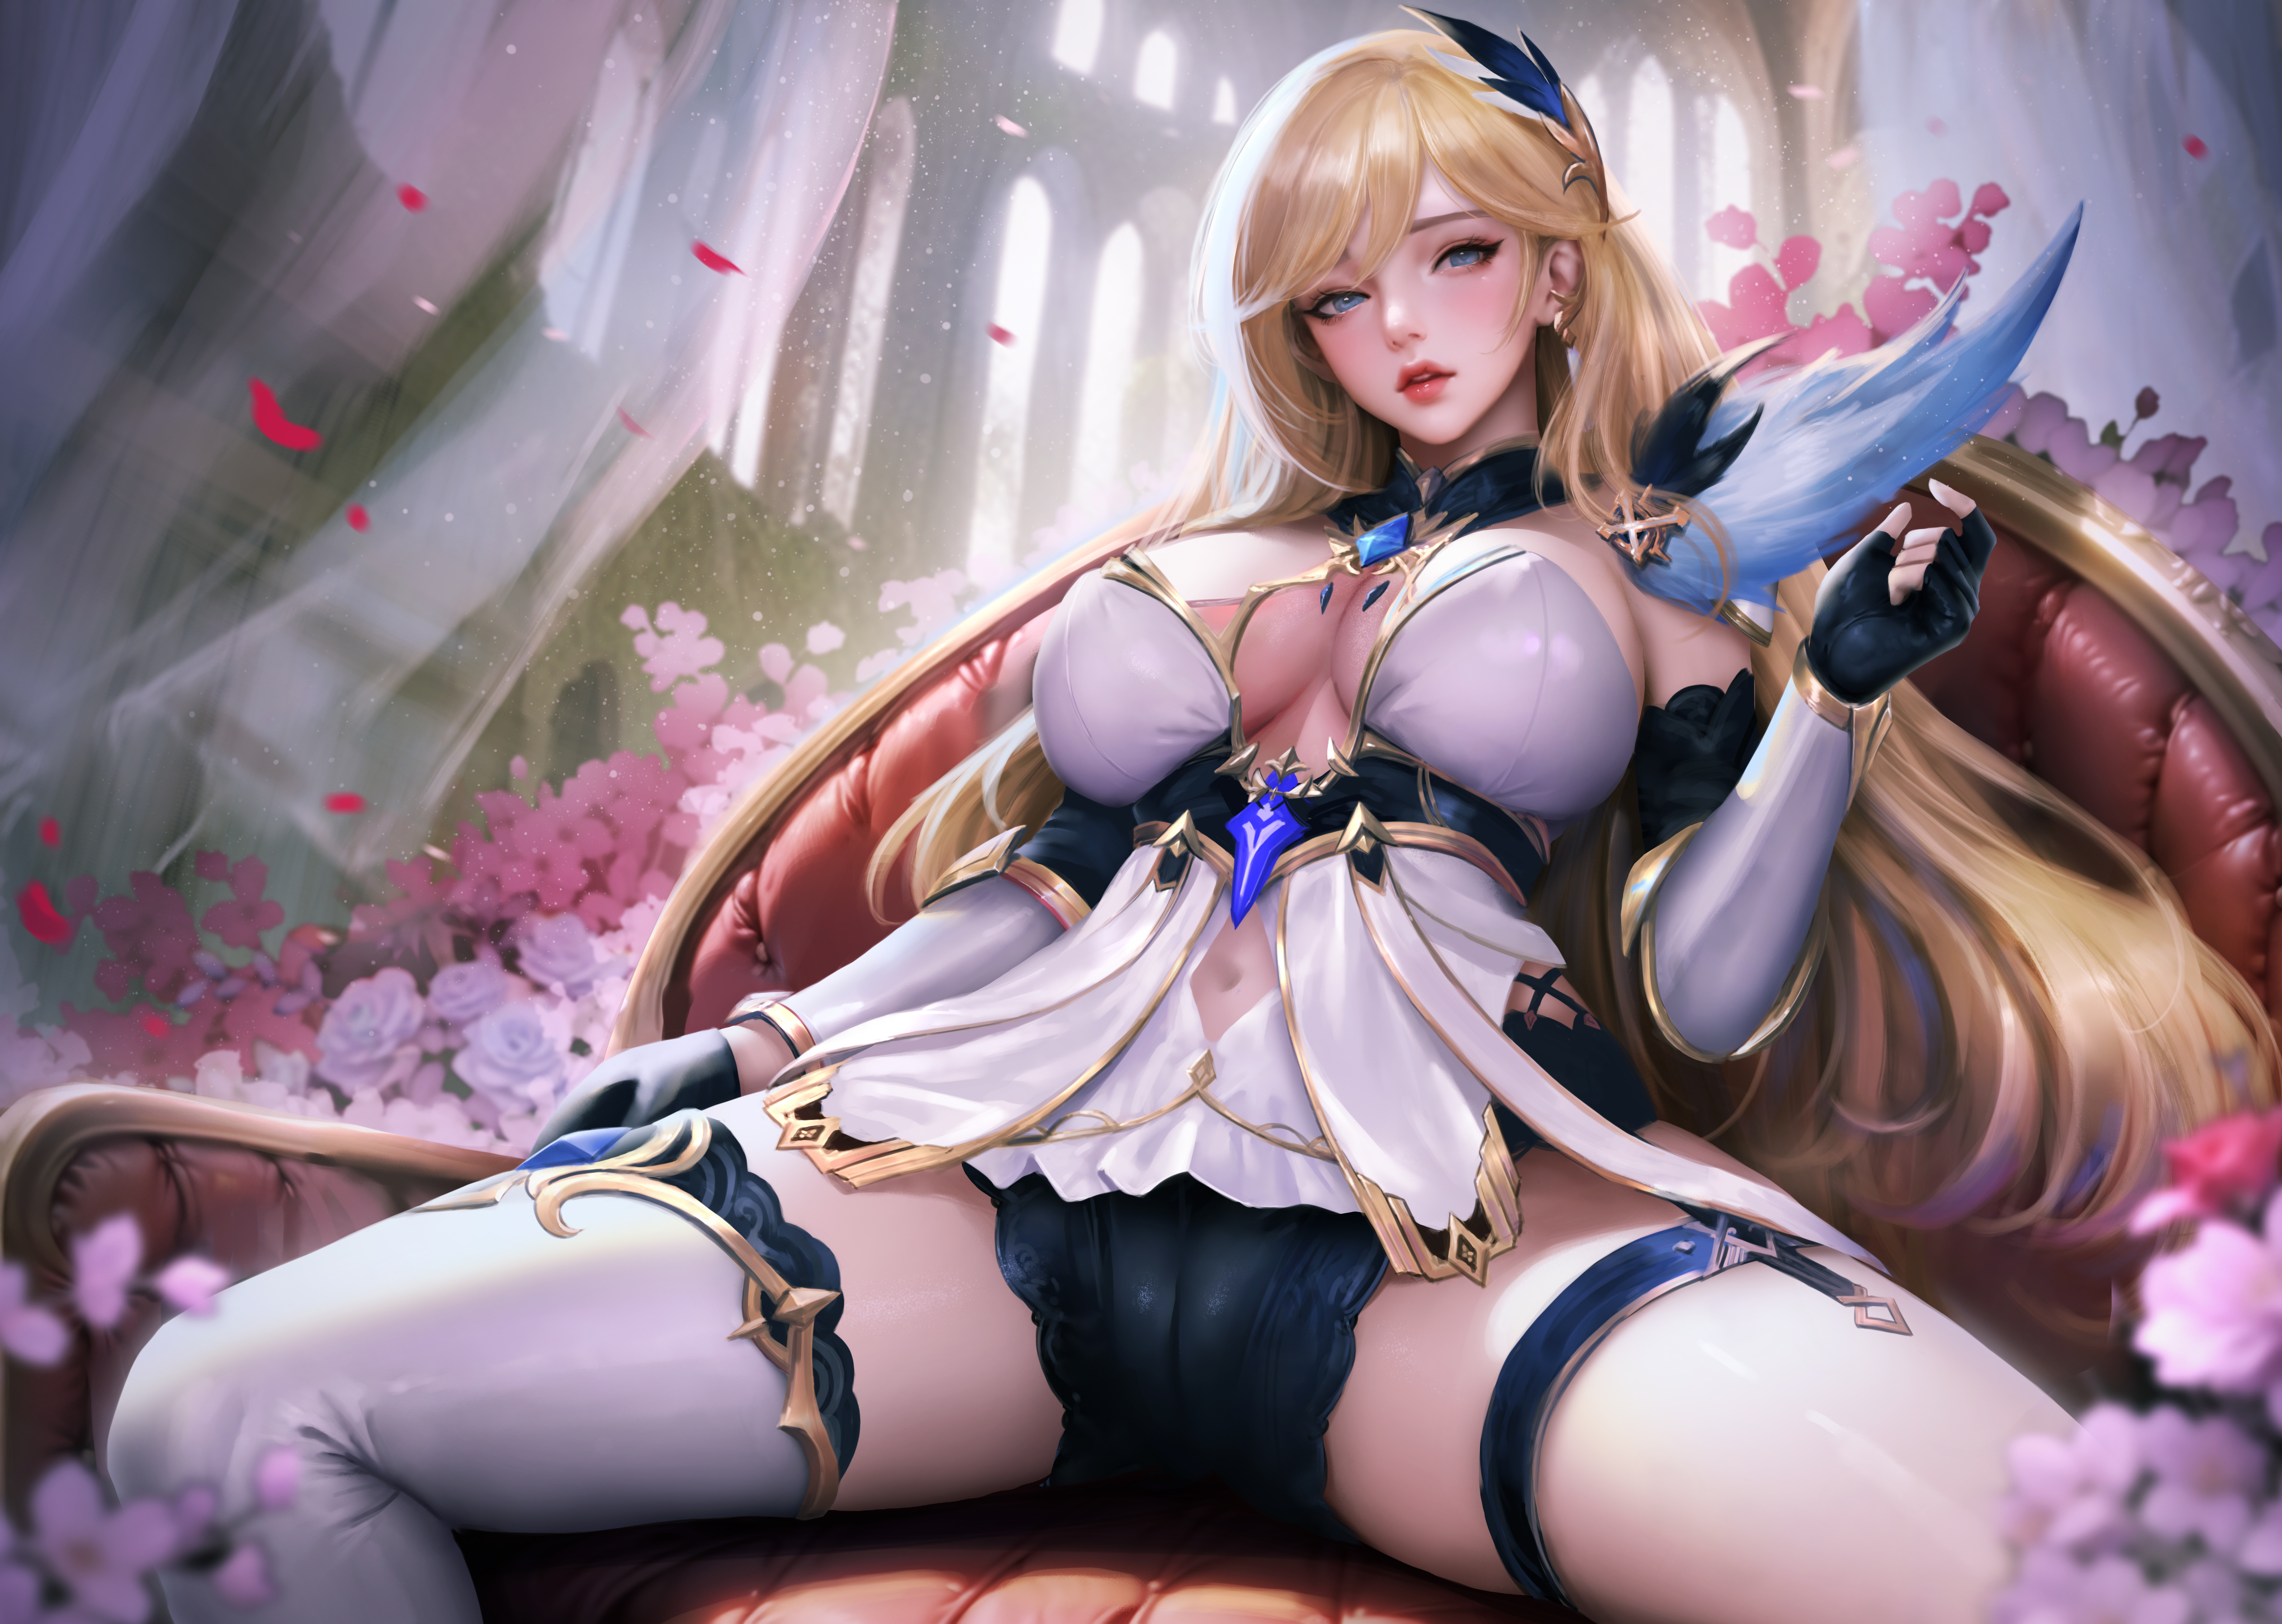 Anime 5046x3592 Bianka Ataegina Honkai Impact 3rd anime anime girls video games video game girls artwork drawing fan art Windwalker Ture white stockings sitting petals spread legs looking at viewer long hair gloves fingerless gloves blonde blue eyes flowers big boobs belly button couch